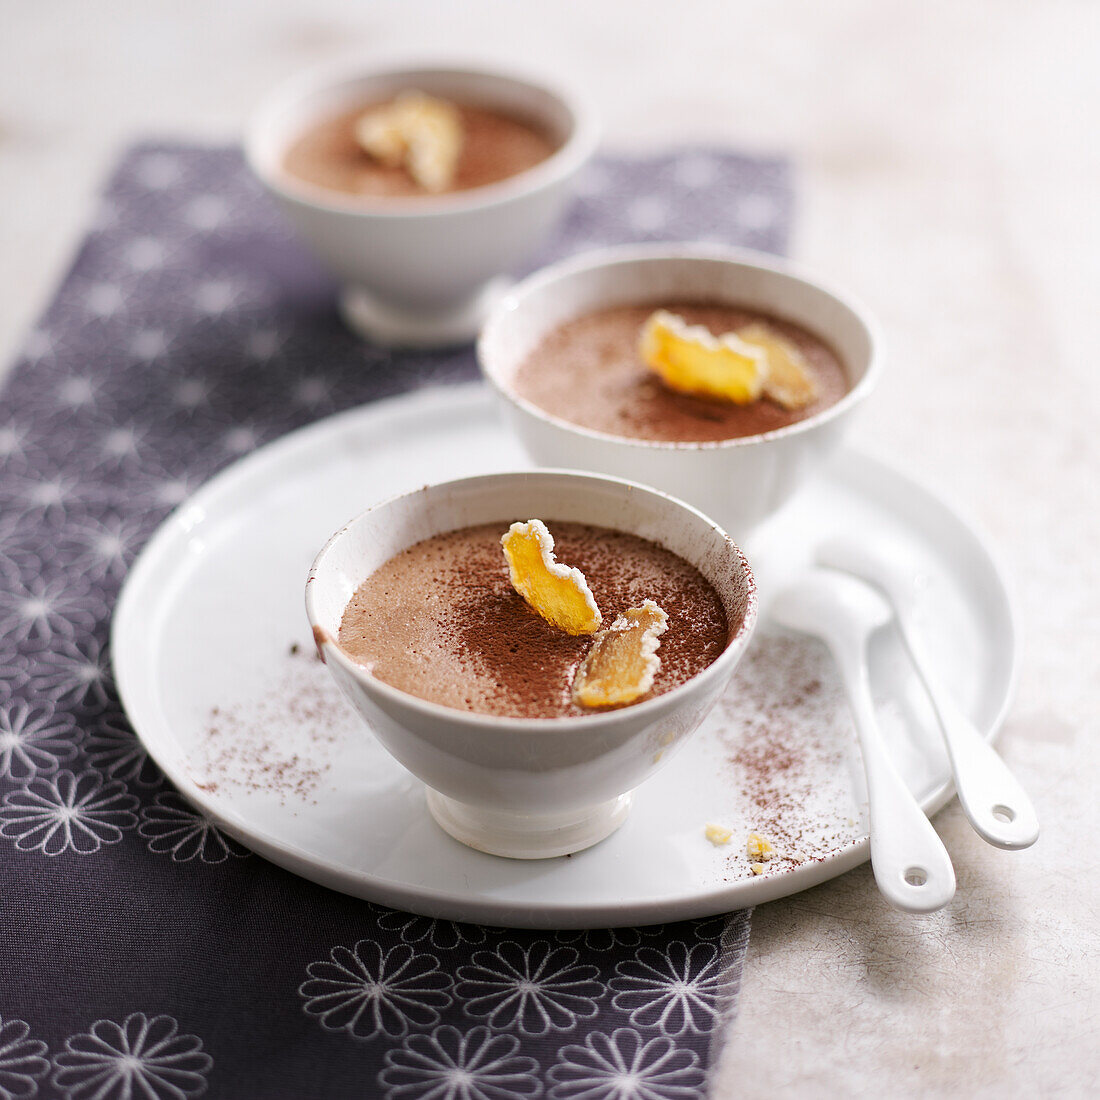 Chocolate and ginger mousse